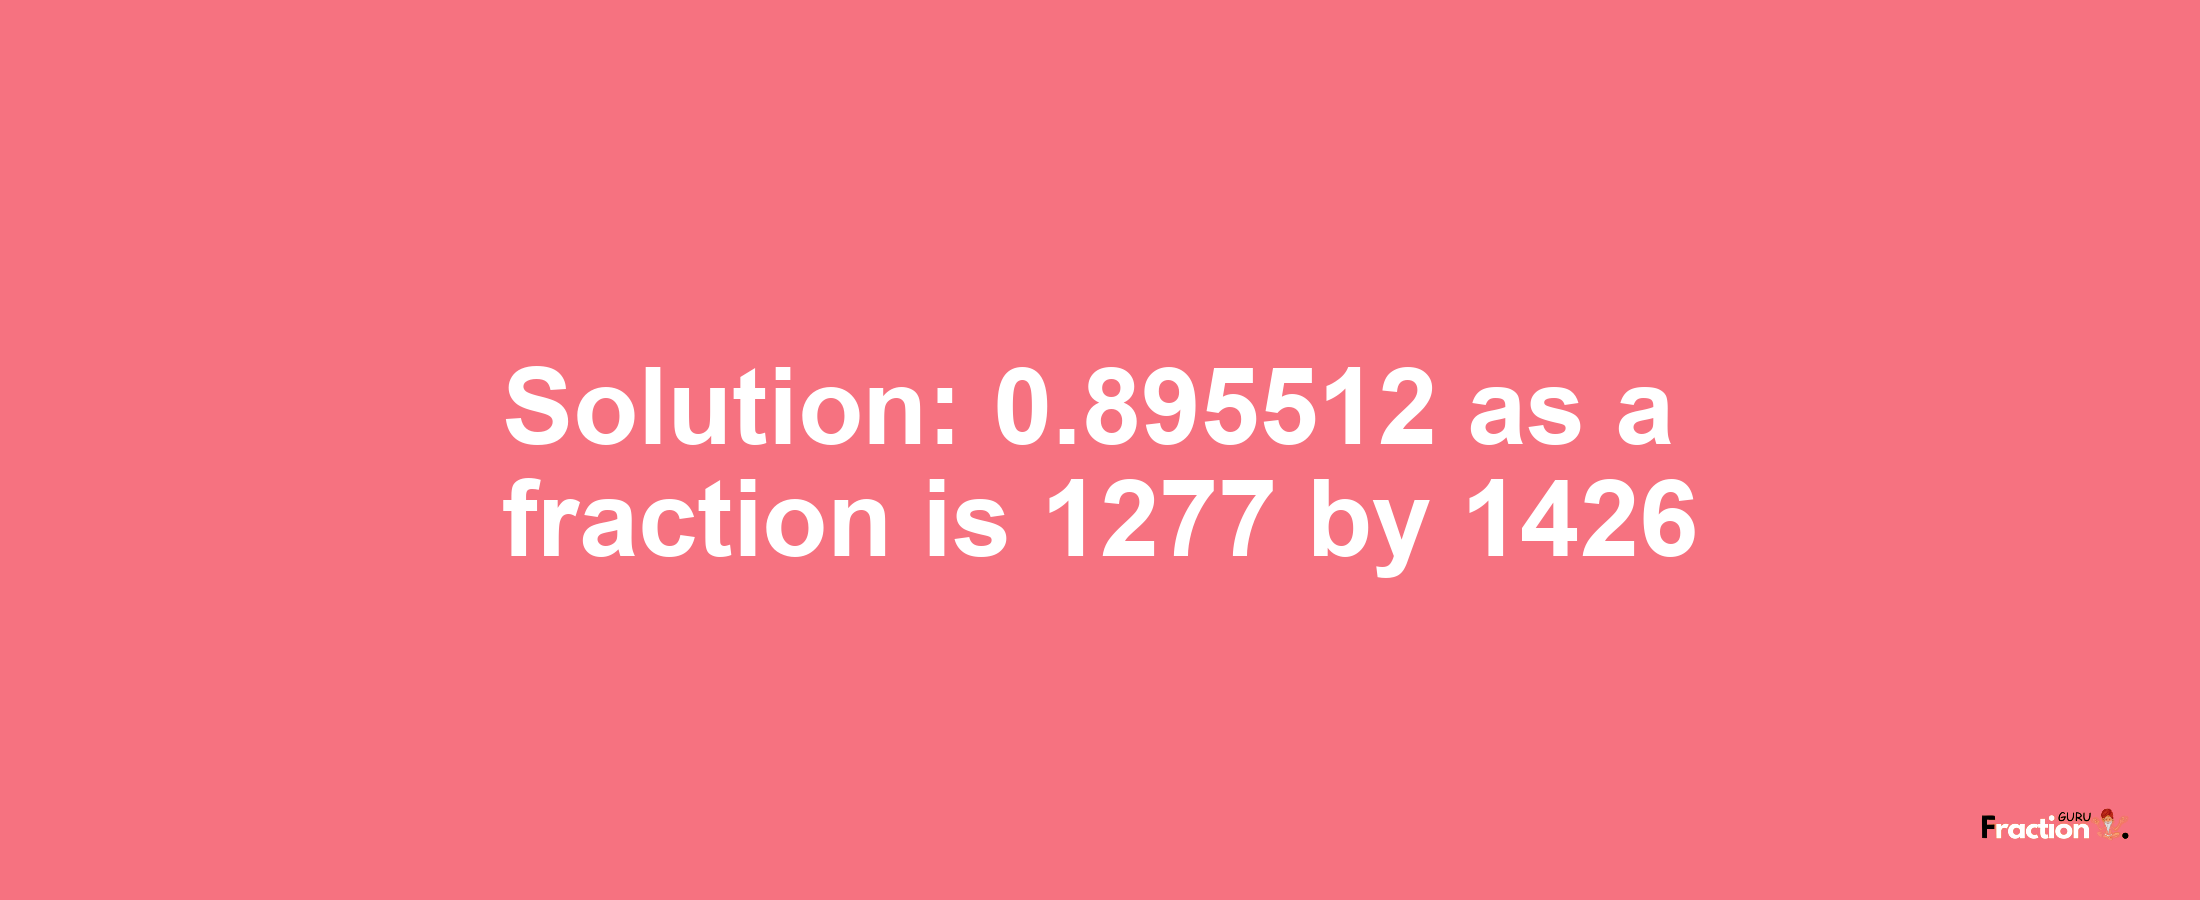 Solution:0.895512 as a fraction is 1277/1426